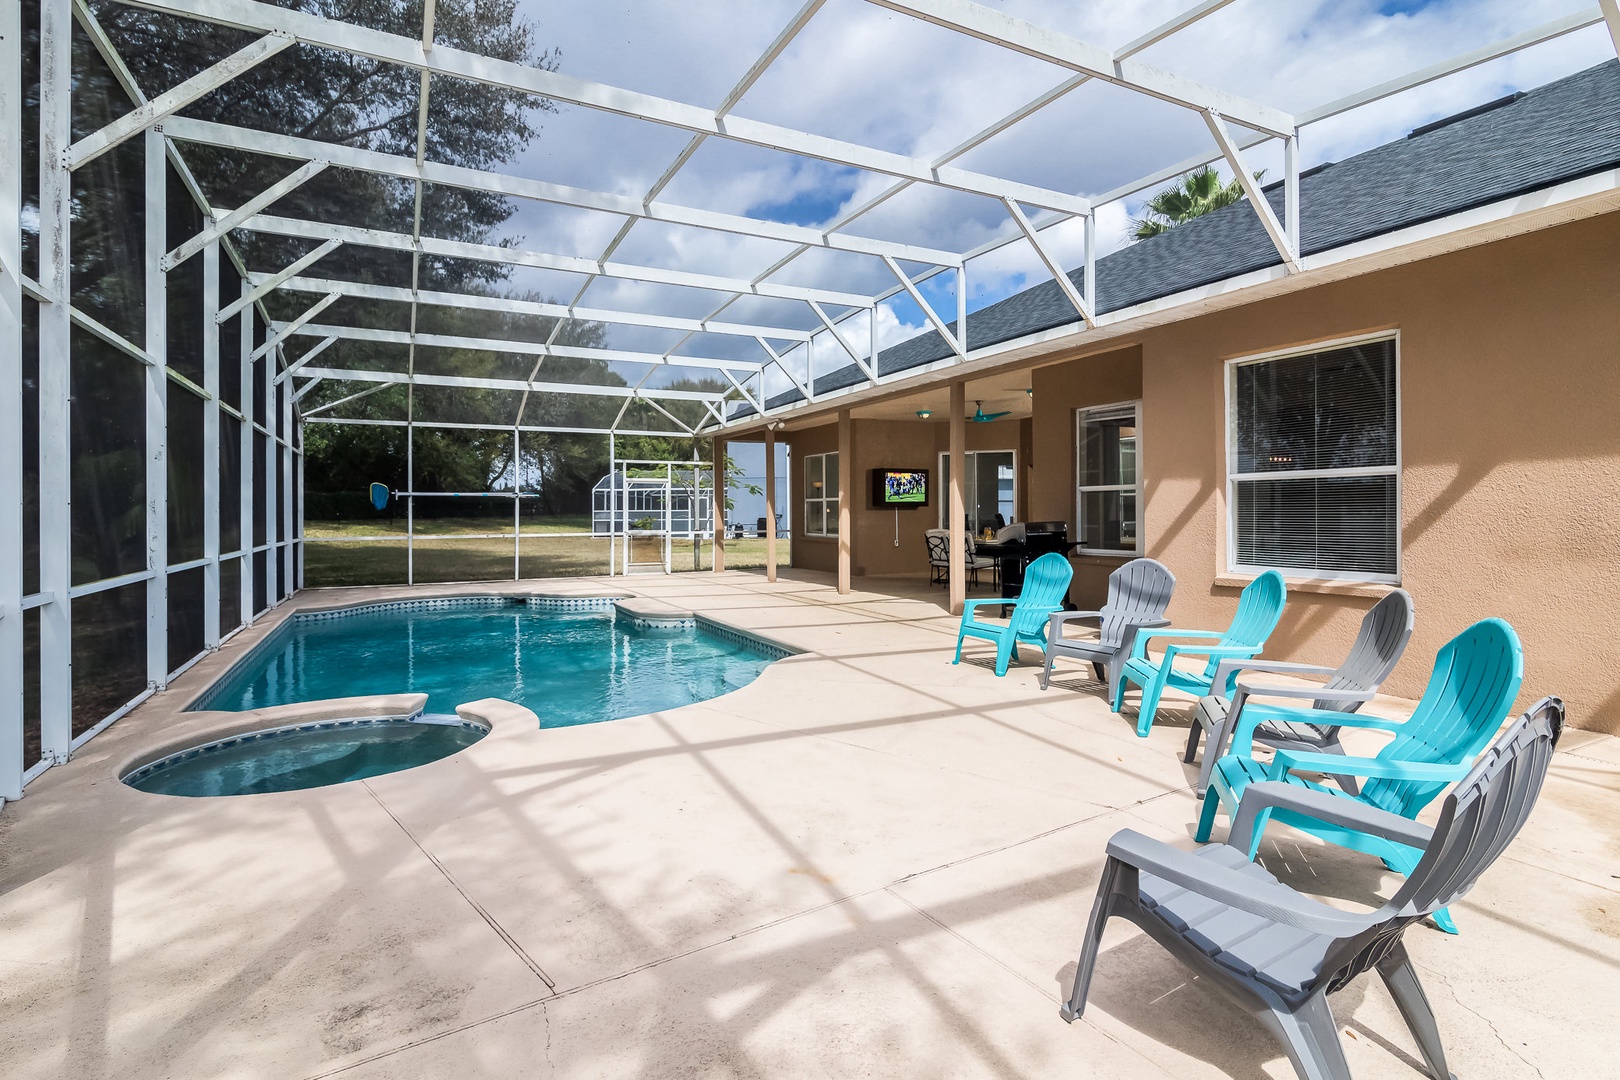 Private heated (at no additional cost) pool in screened patio